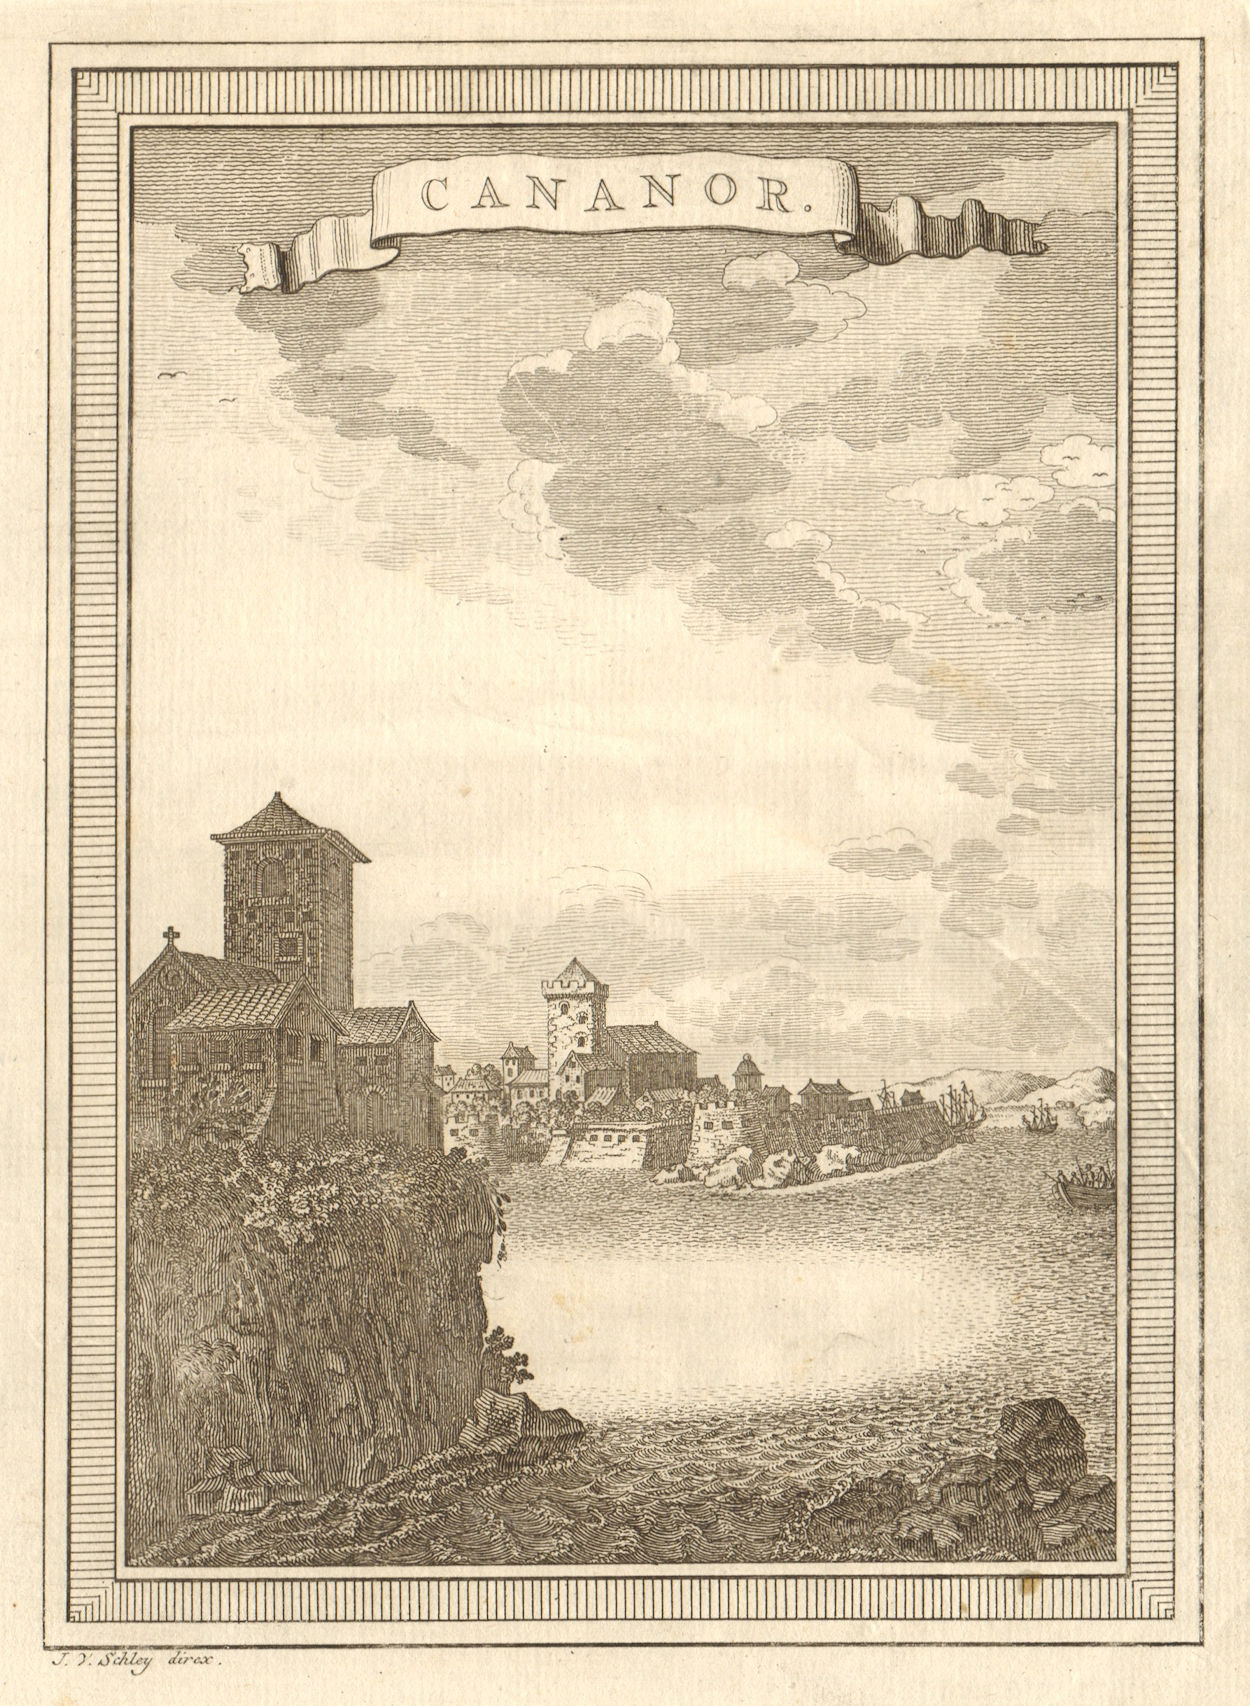 'Cananor'. View of Kannur, Kerala, India. SCHLEY 1755 old antique print